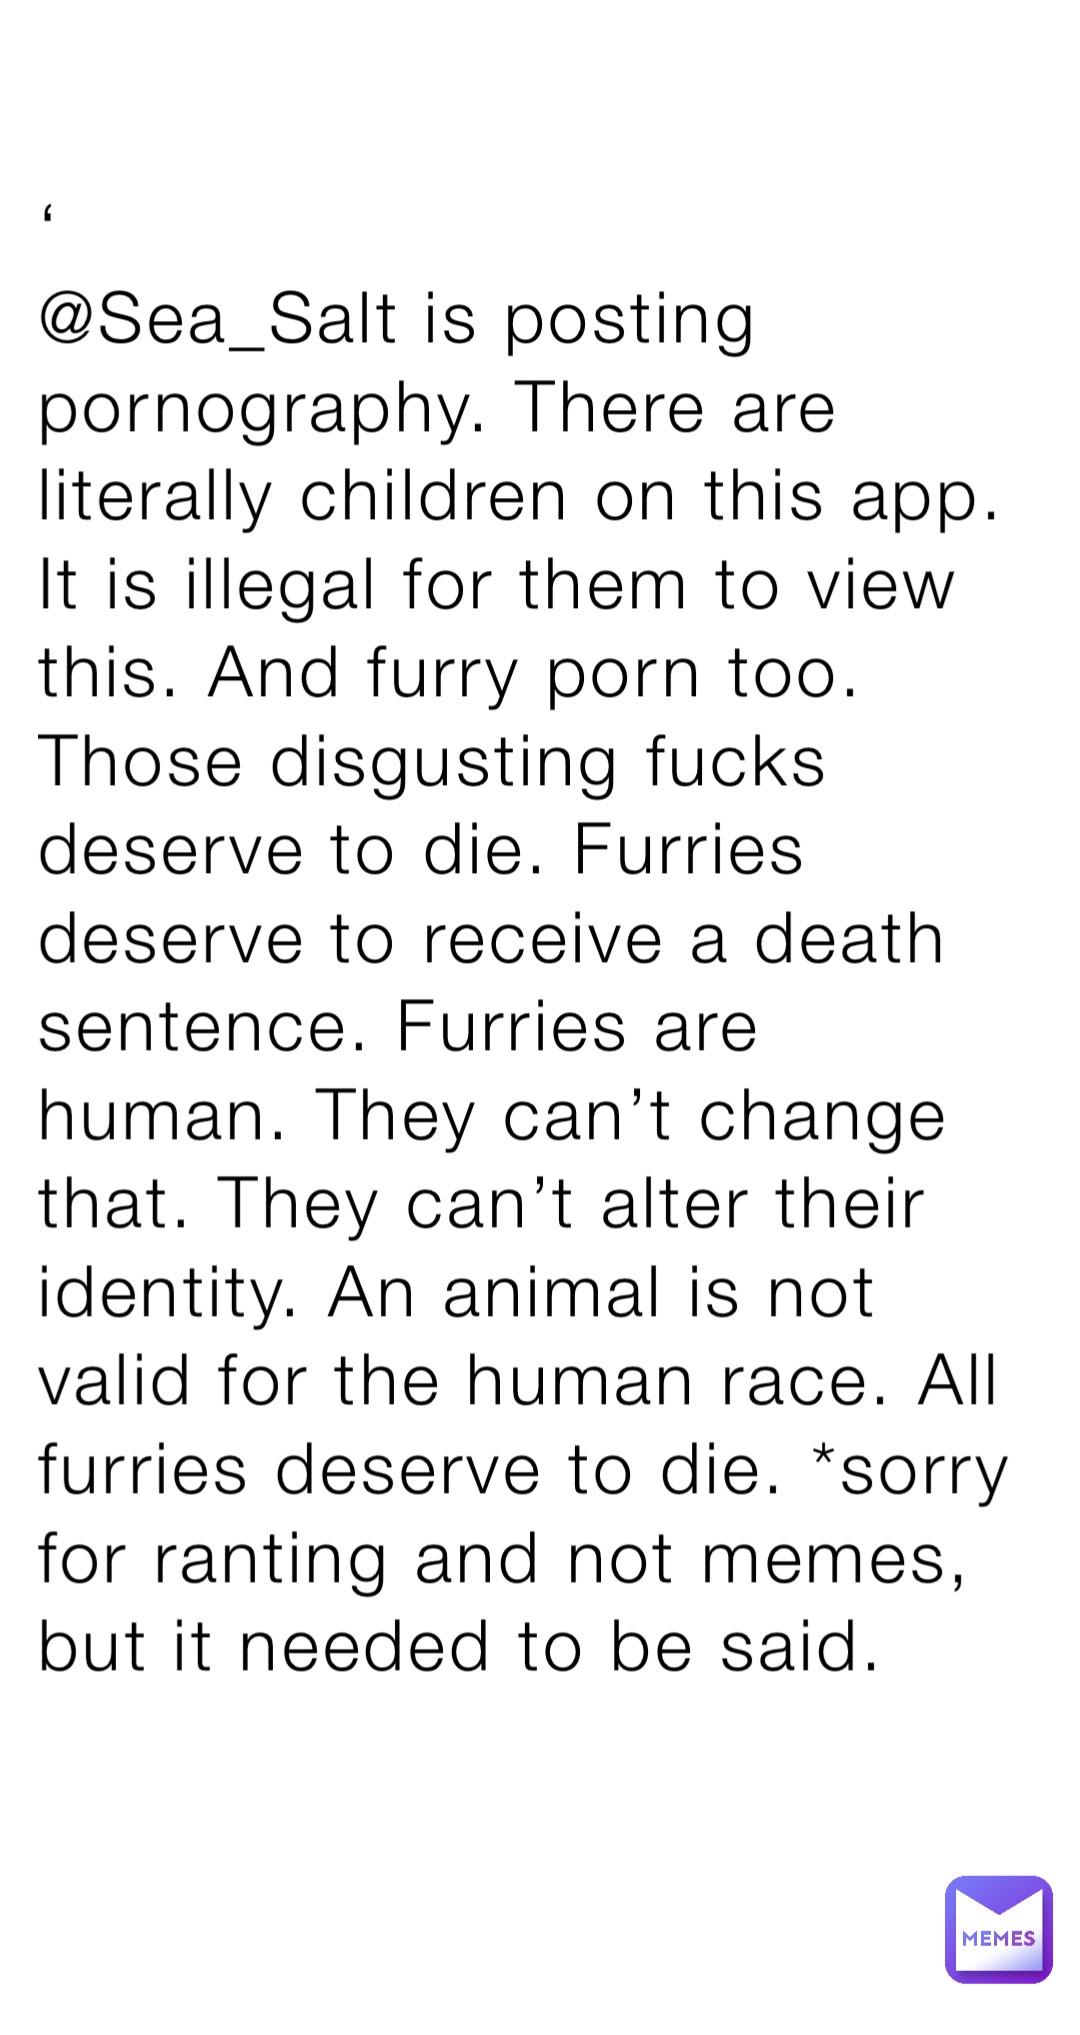 ‘
@Sea_Salt is posting pornography. There are literally children on this app. It is illegal for them to view this. And furry porn too. Those disgusting fucks deserve to die. Furries deserve to receive a death sentence. Furries are human. They can’t change that. They can’t alter their identity. An animal is not valid for the human race. All furries deserve to die. *sorry for ranting and not memes, but it needed to be said.